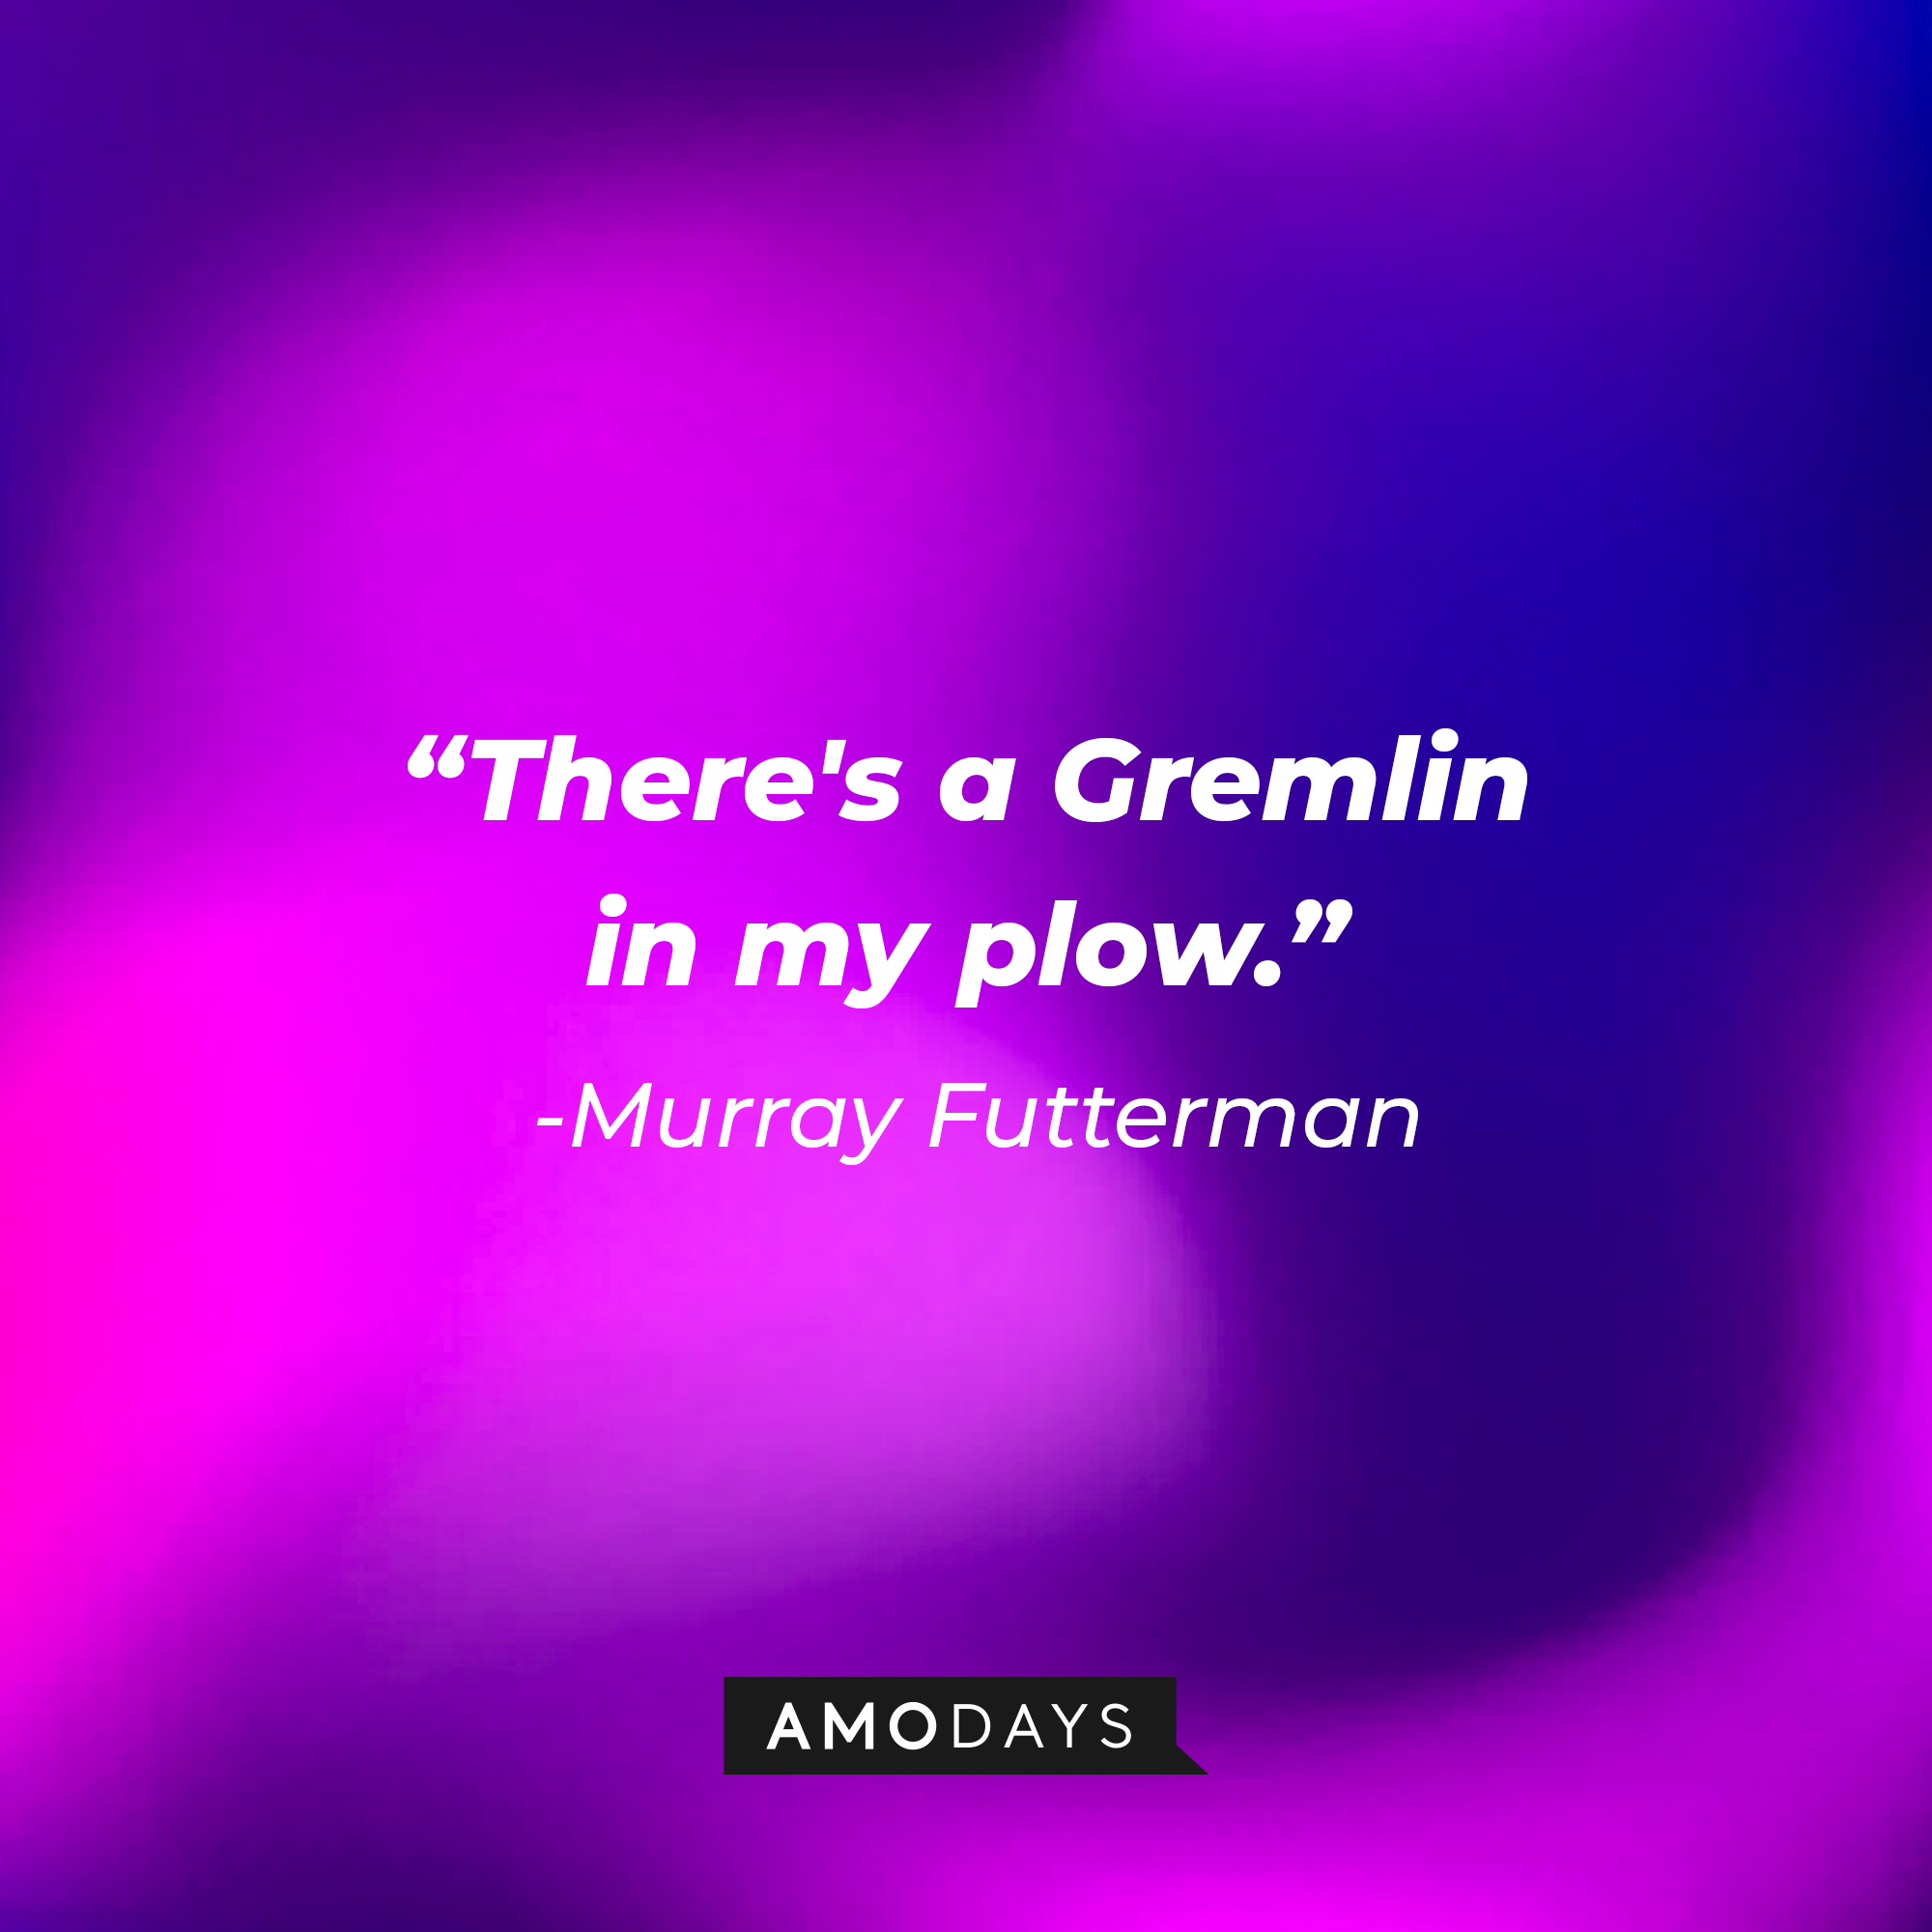 Murray Futterman's quote: "There's a Gremlin in my plow." | Source: AmoDays